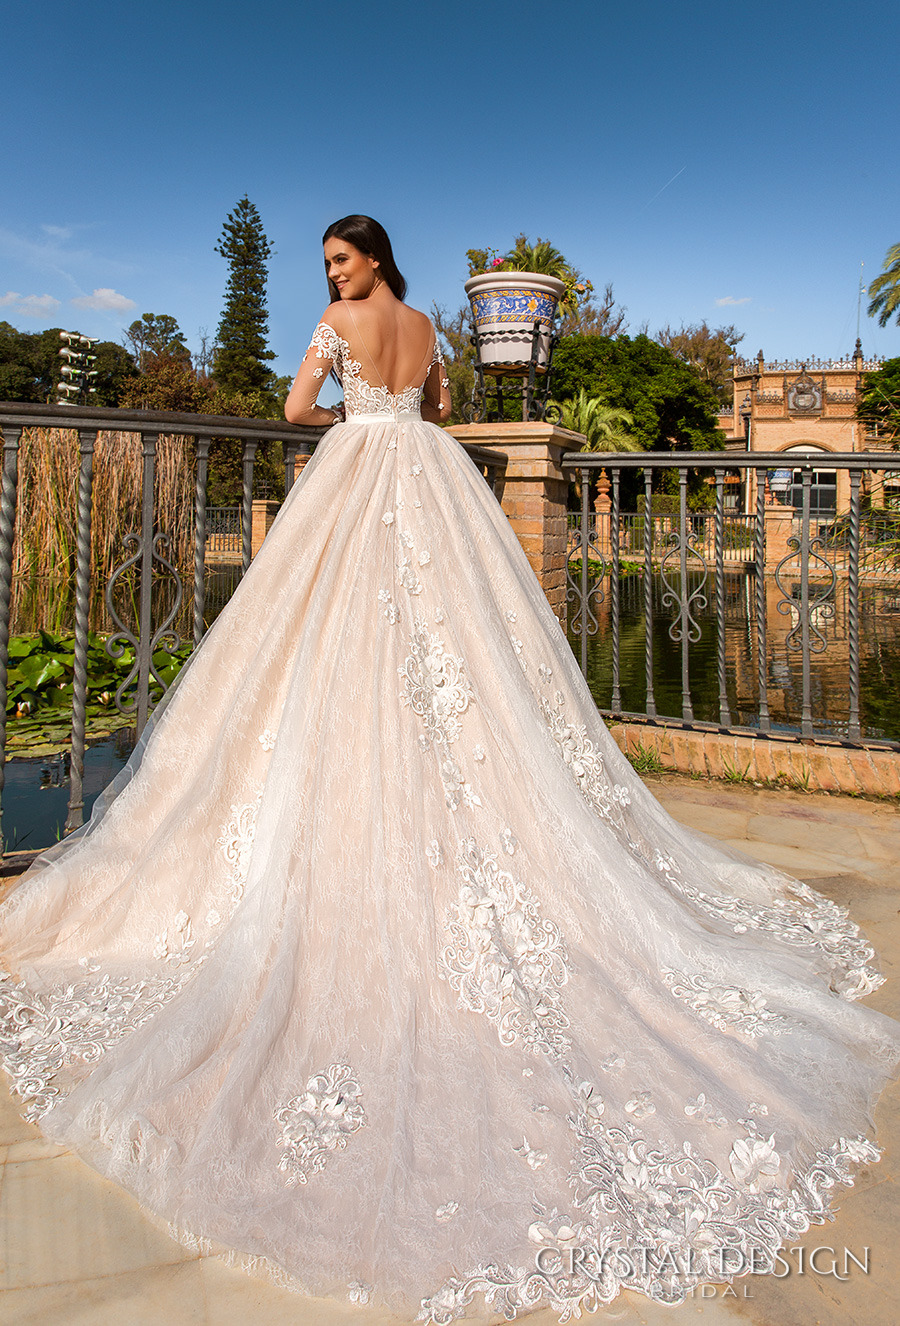 Beautiful Wedding Dresses from the 2017 Crystal Design Collection —  “Sevilla” Bridal Campaign